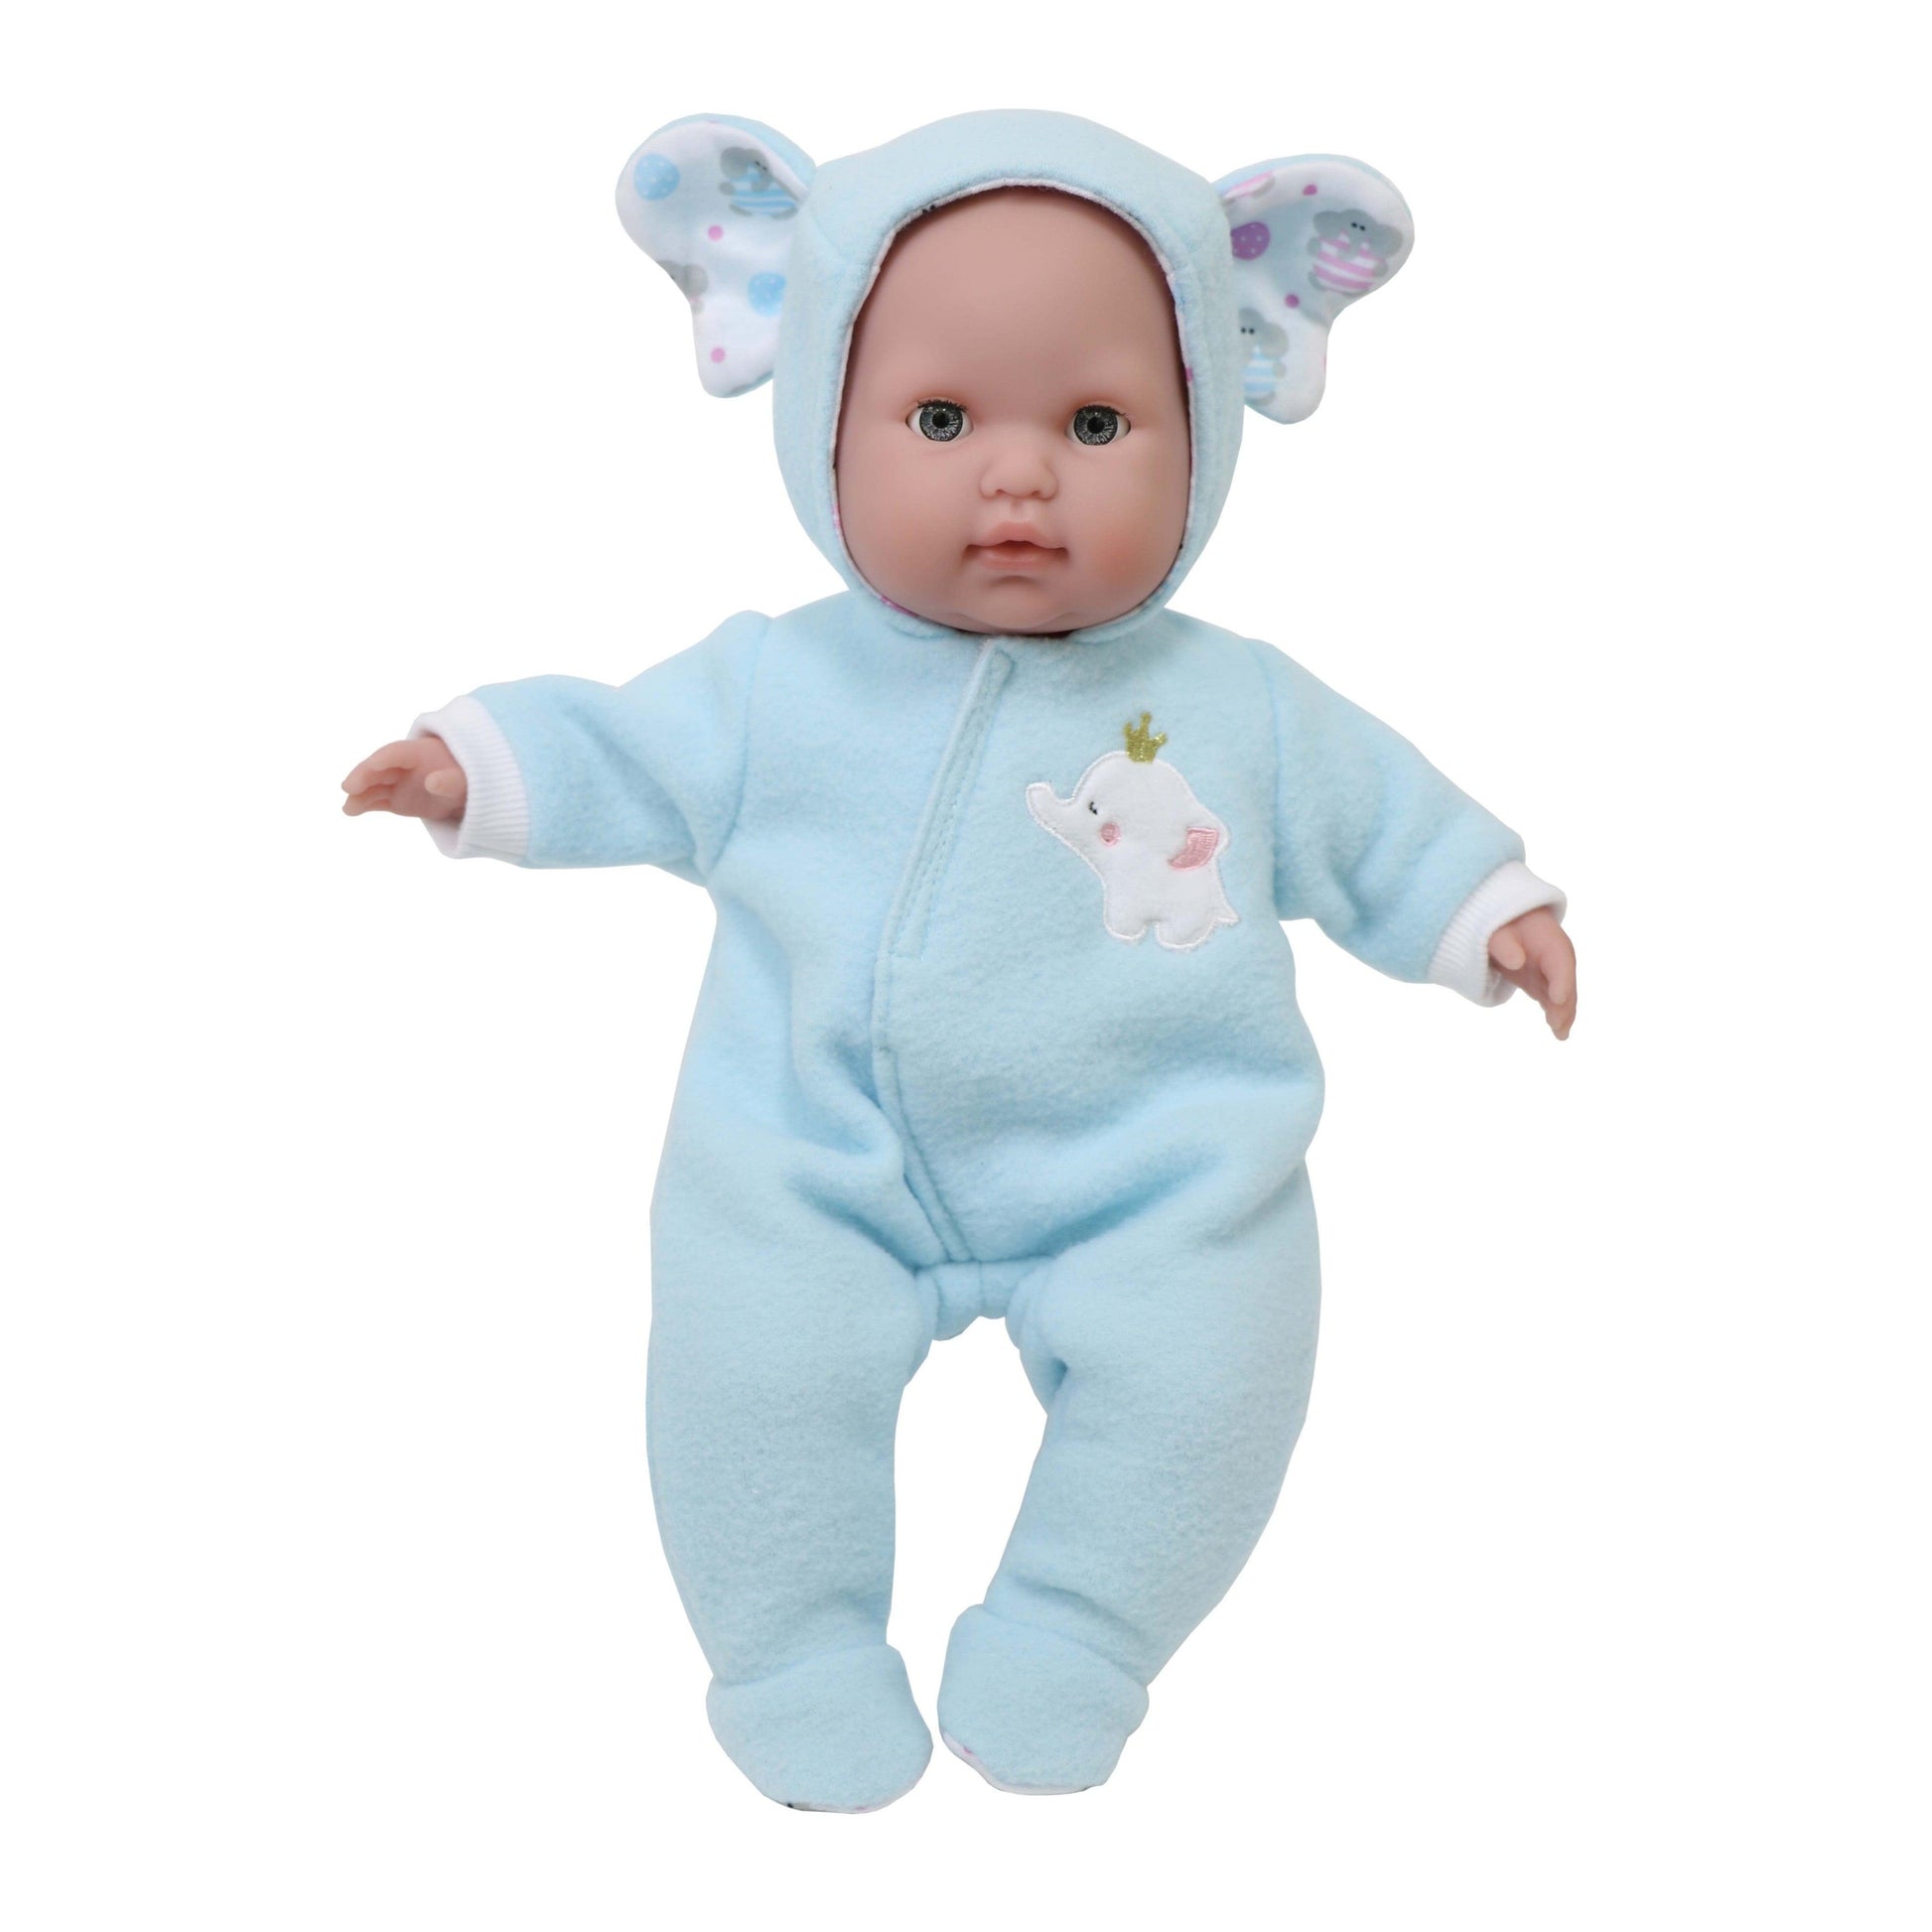 JC Toys Berenguer Boutique Baby Doll Outfit Blue Elephant Themed Hooded Onesie Fits dolls 14"- 18" - JC Toys Group Inc.